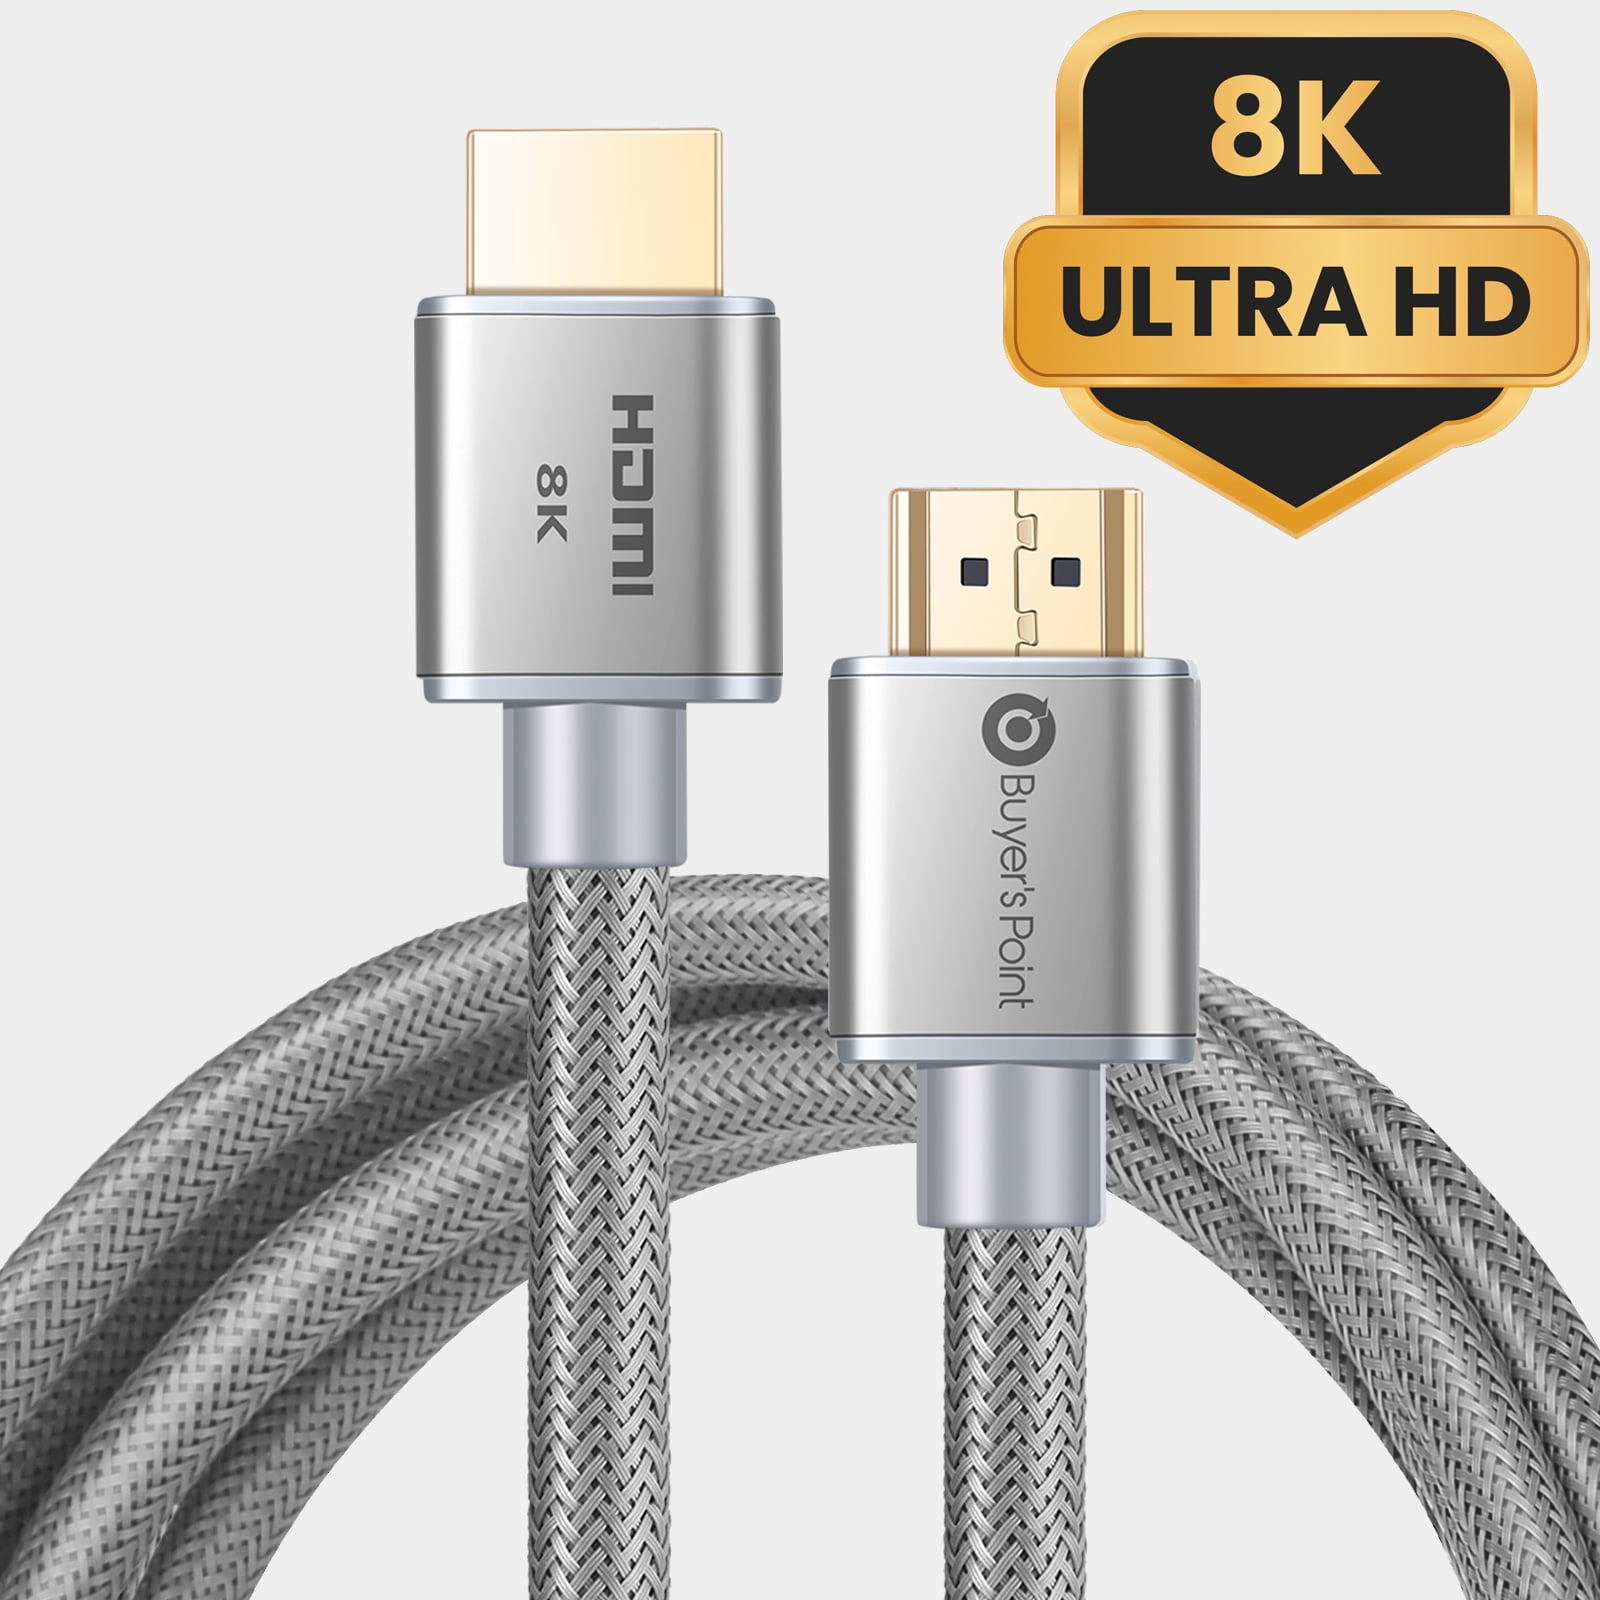 Buyer's Point 8K Ultra High Speed HDMI Cable (6ft) with 120Hz & Compatible with Apple TV, Nintendo Switch, Roku, Xbox, PS5, PS4, Projector, HDTV, Bluray (Gray) -